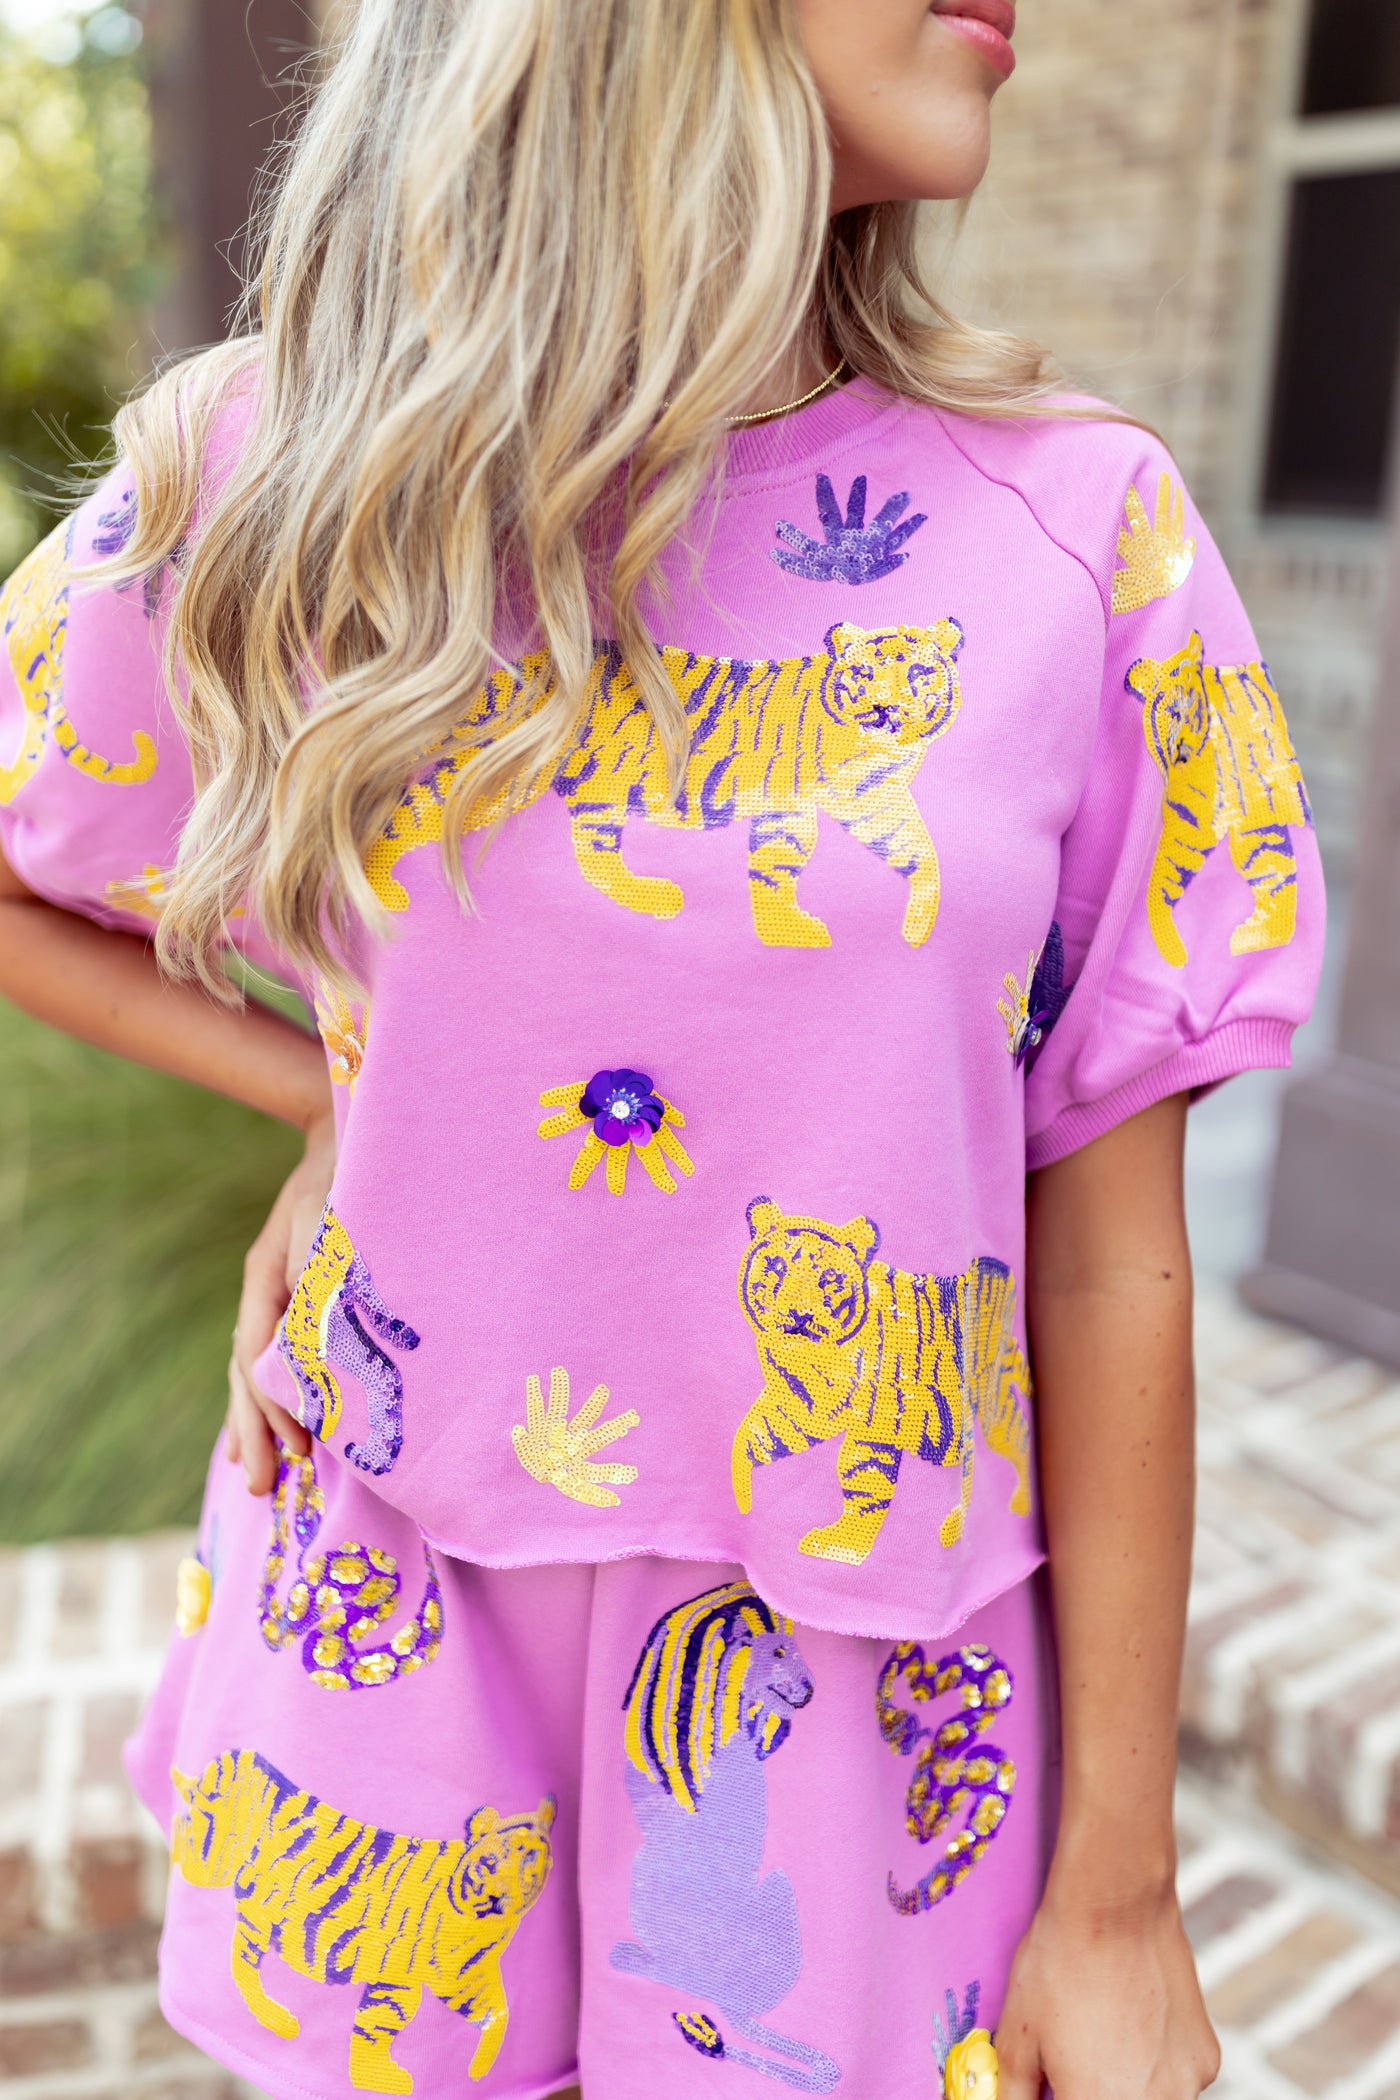 Queen Of Sparkles Lavender & Yellow Animal Top